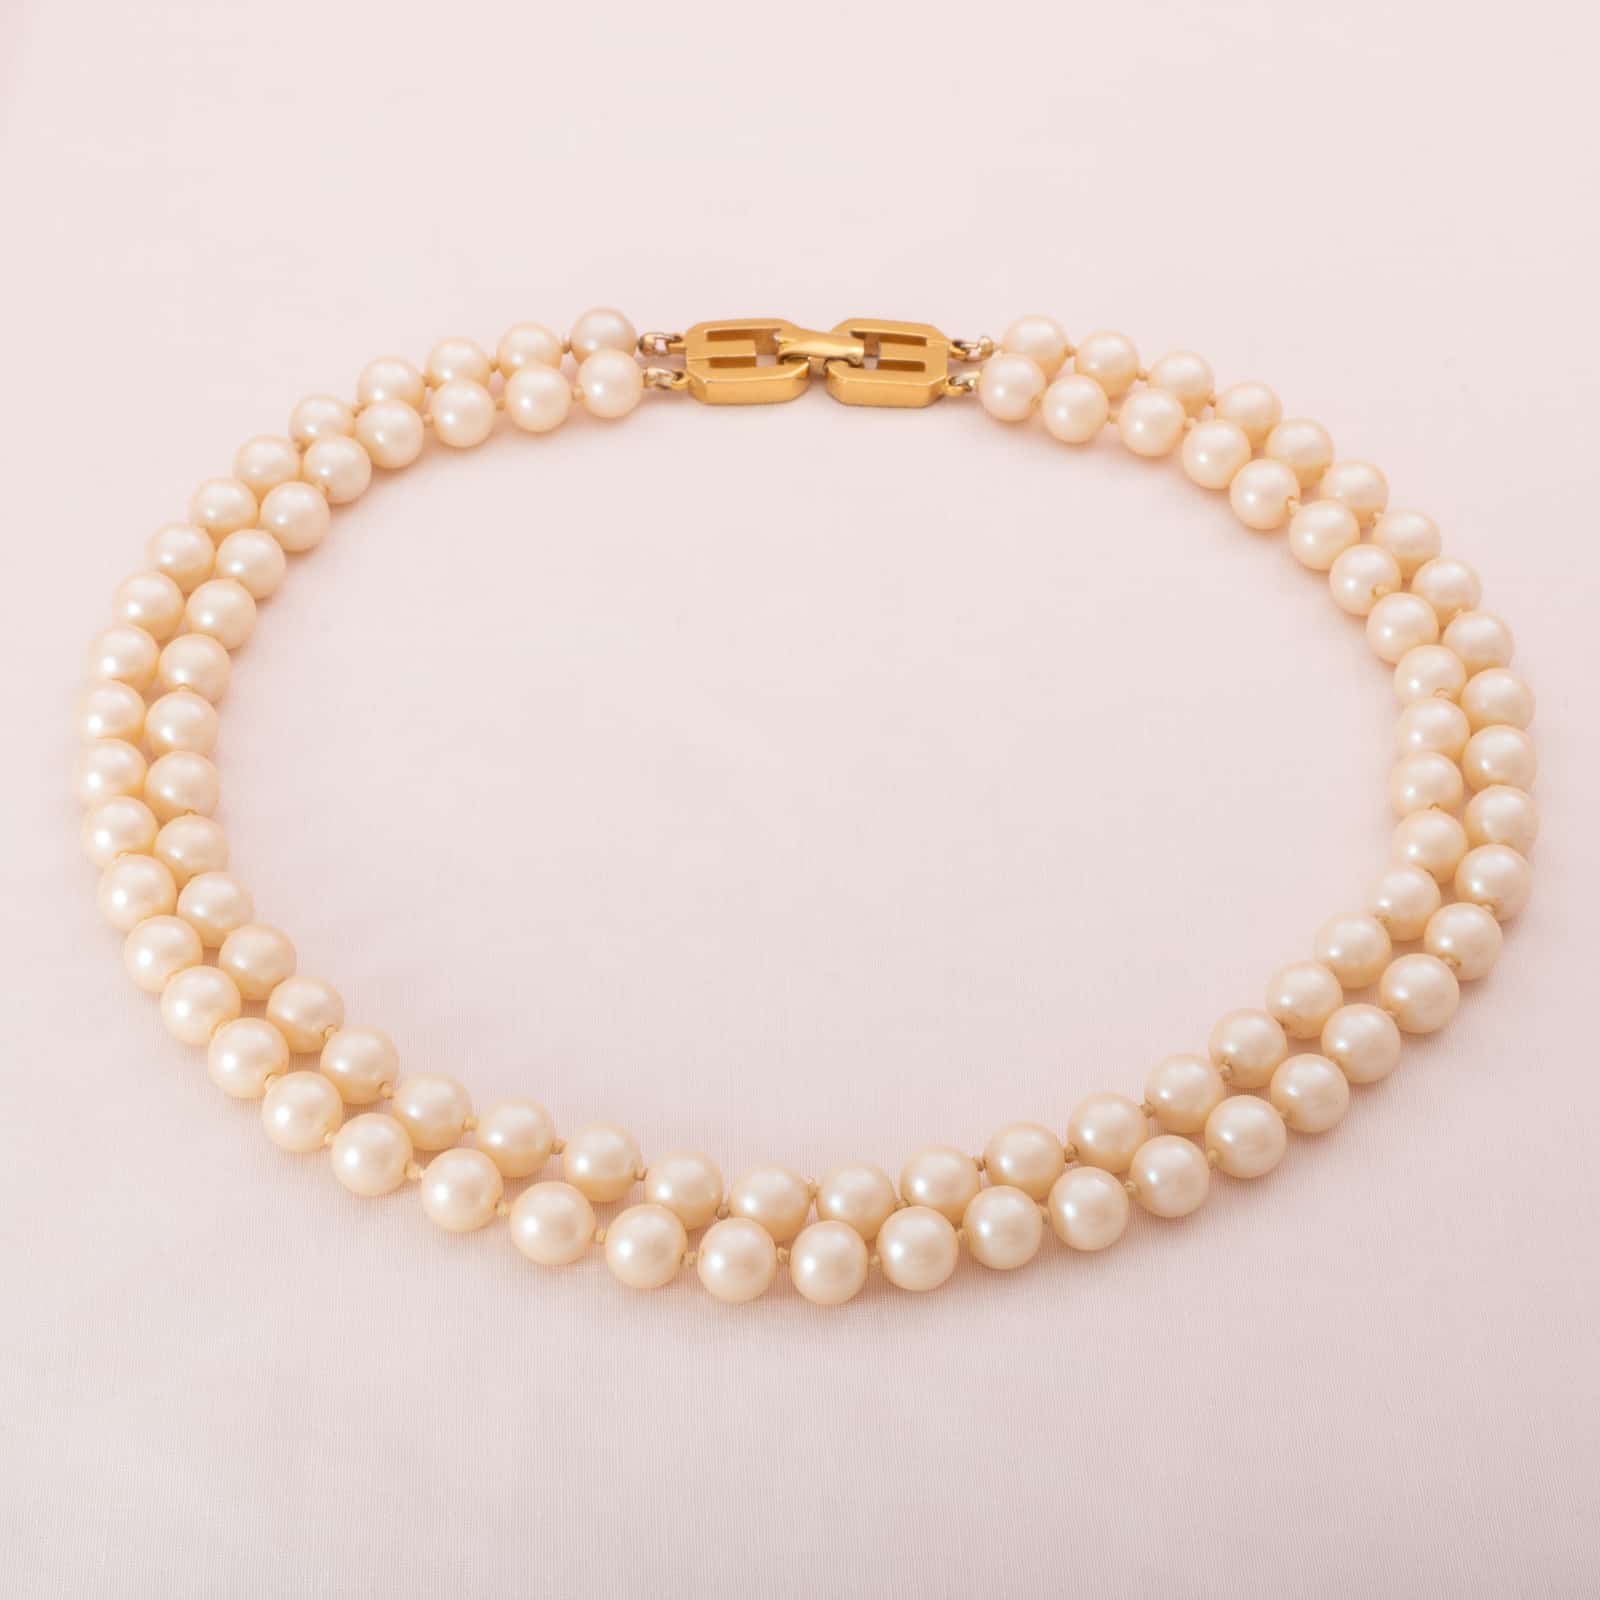 strand – necklace from Find pearl Beauty GIVENCHY double 1977 Vintage